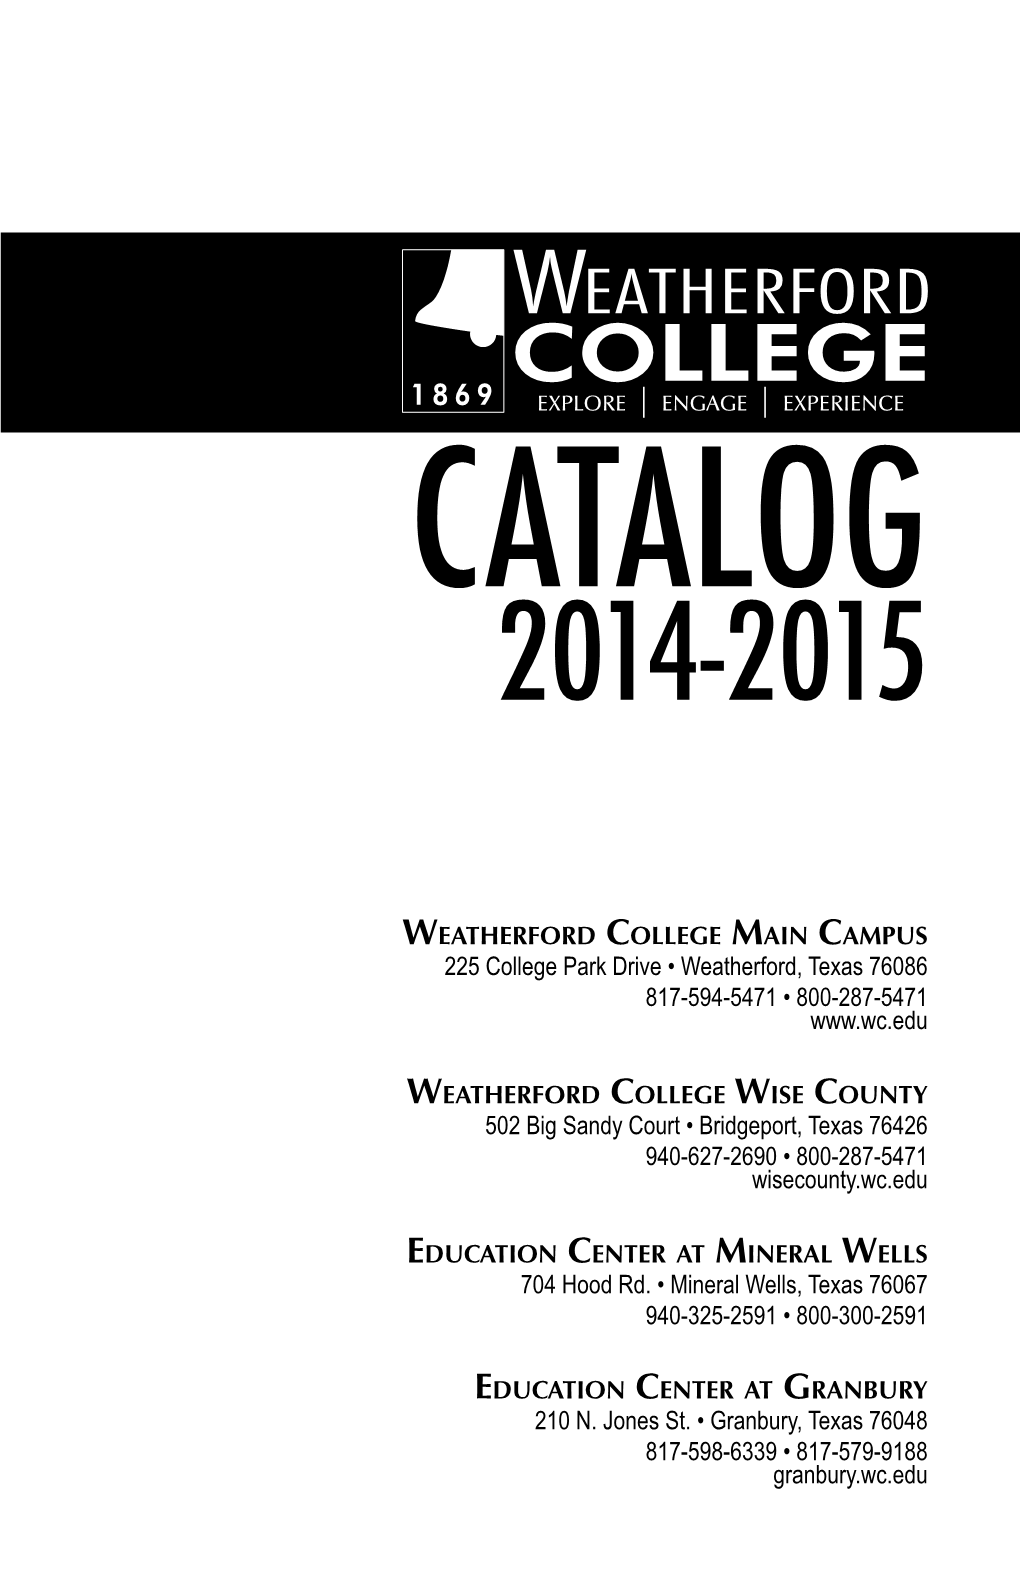 WC Catalog and on the Website